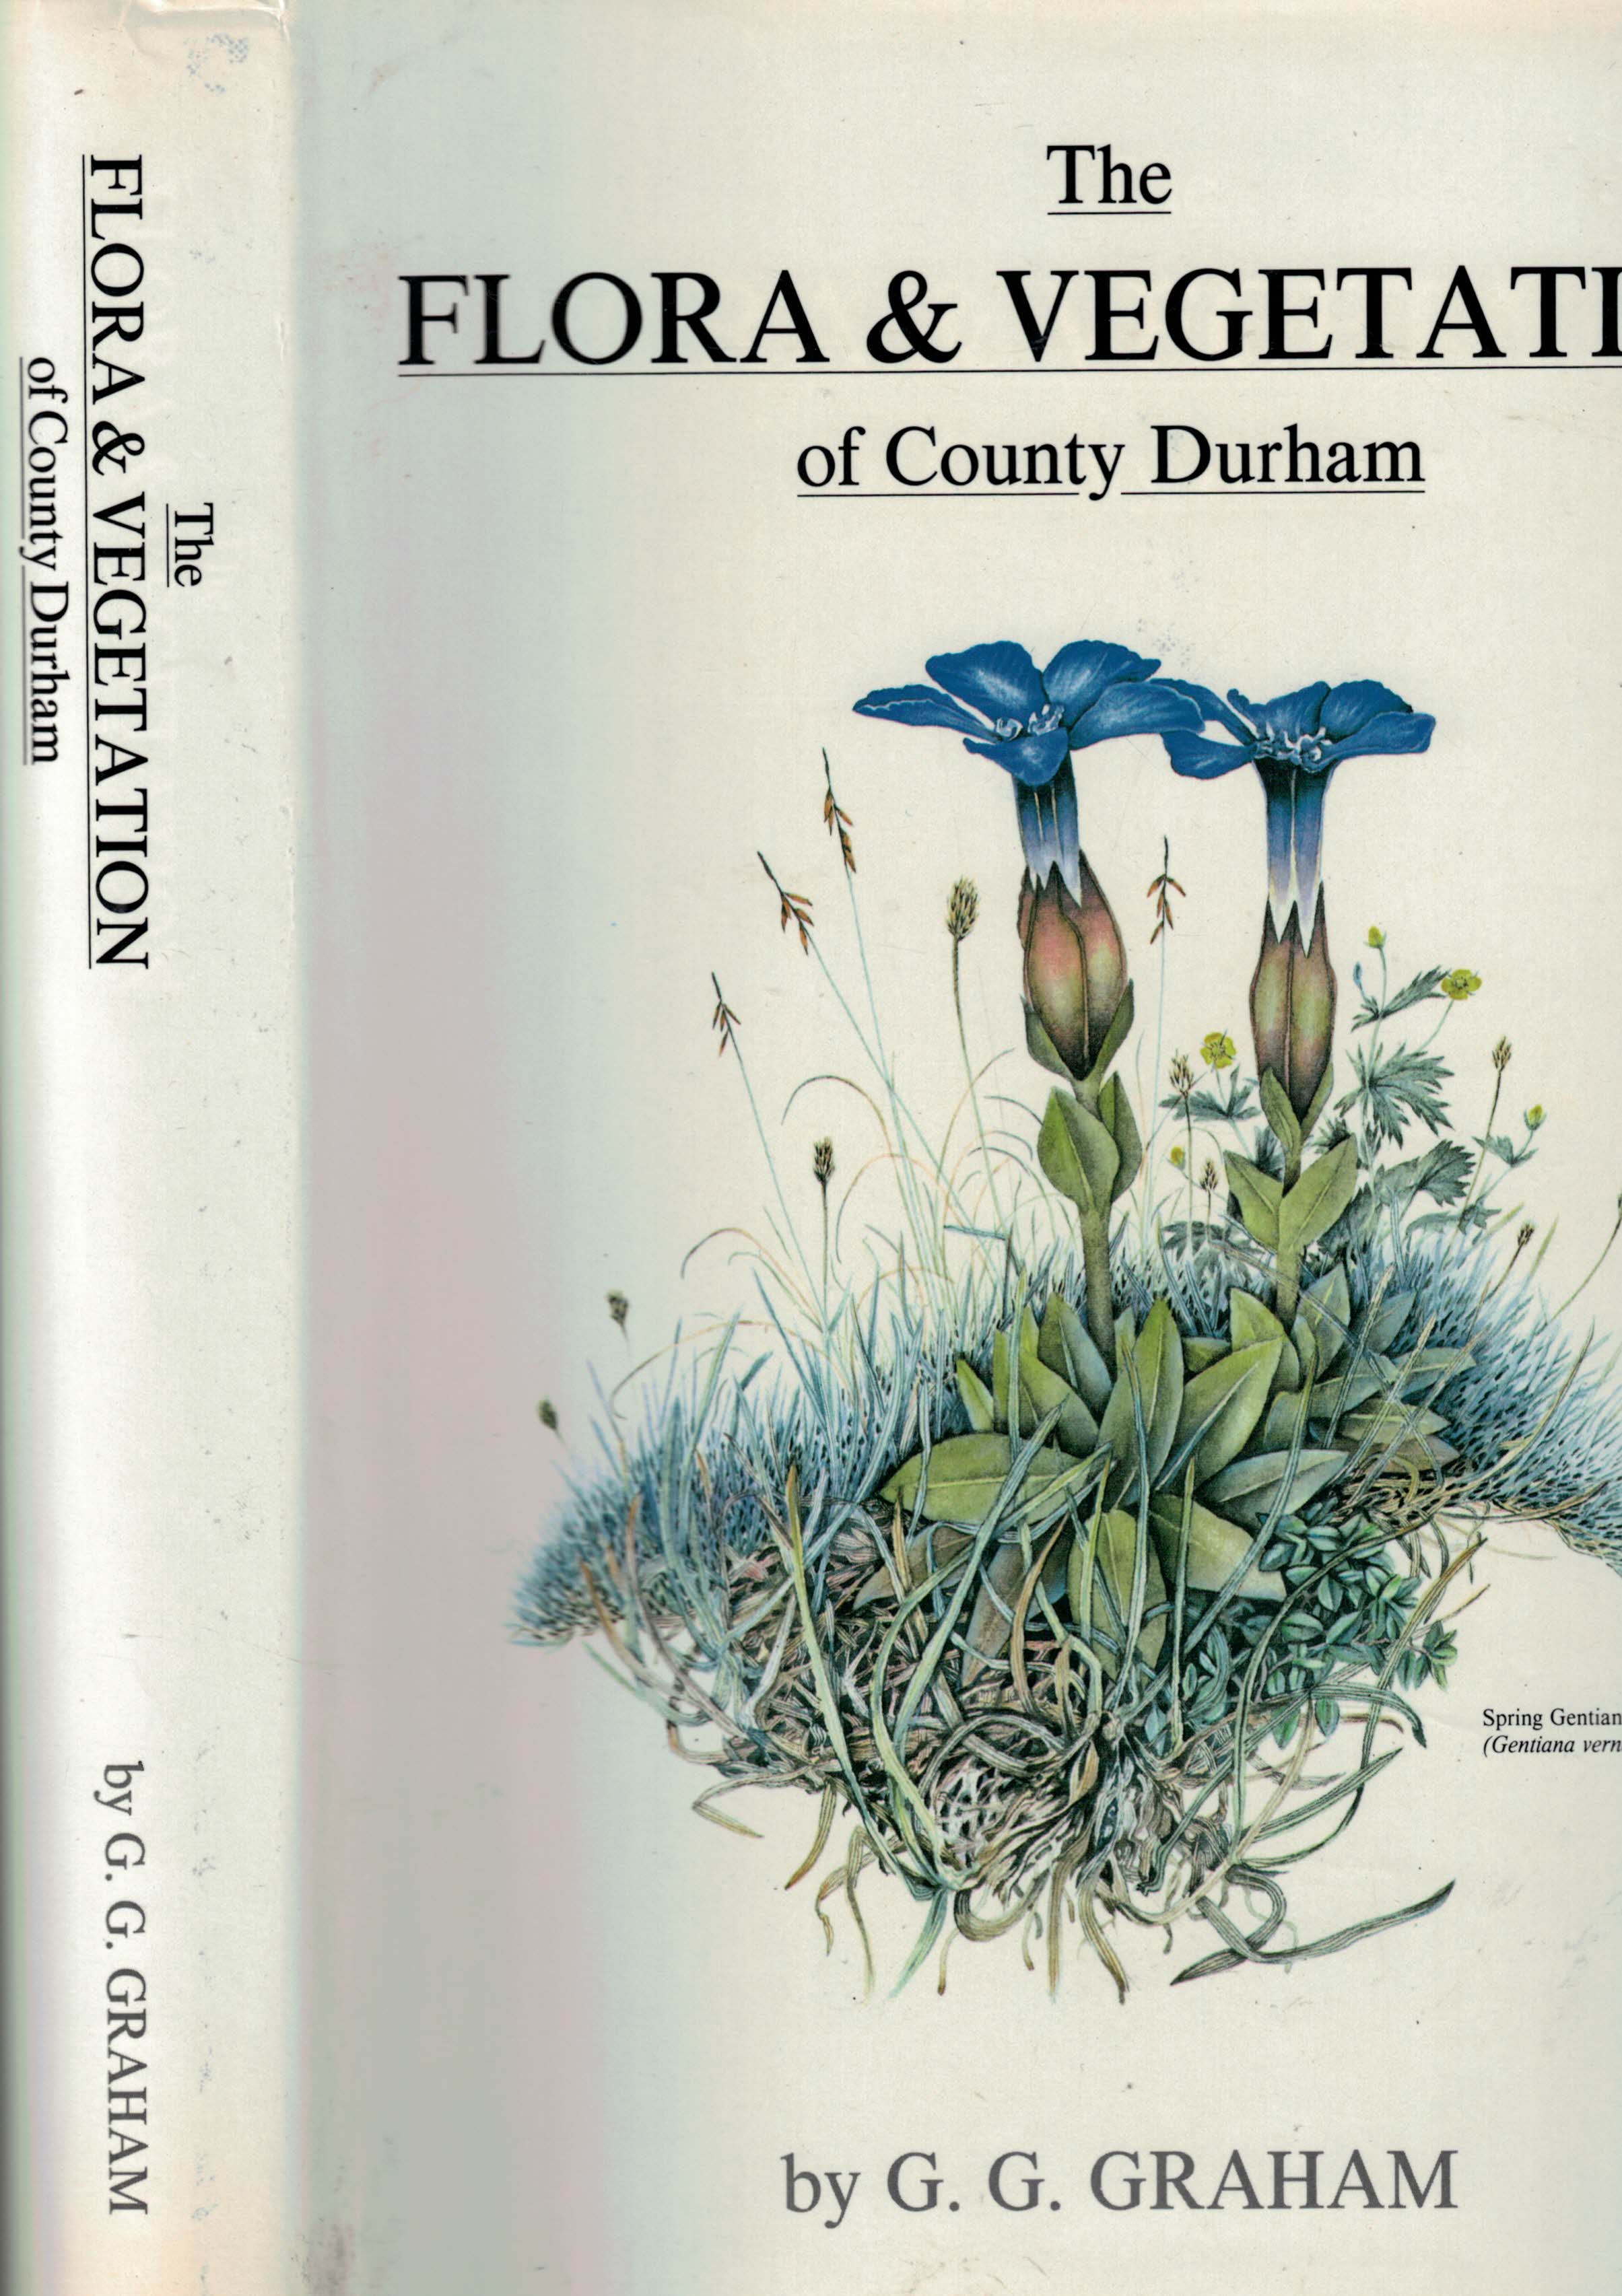 The Flora and Vegetation of County Durham